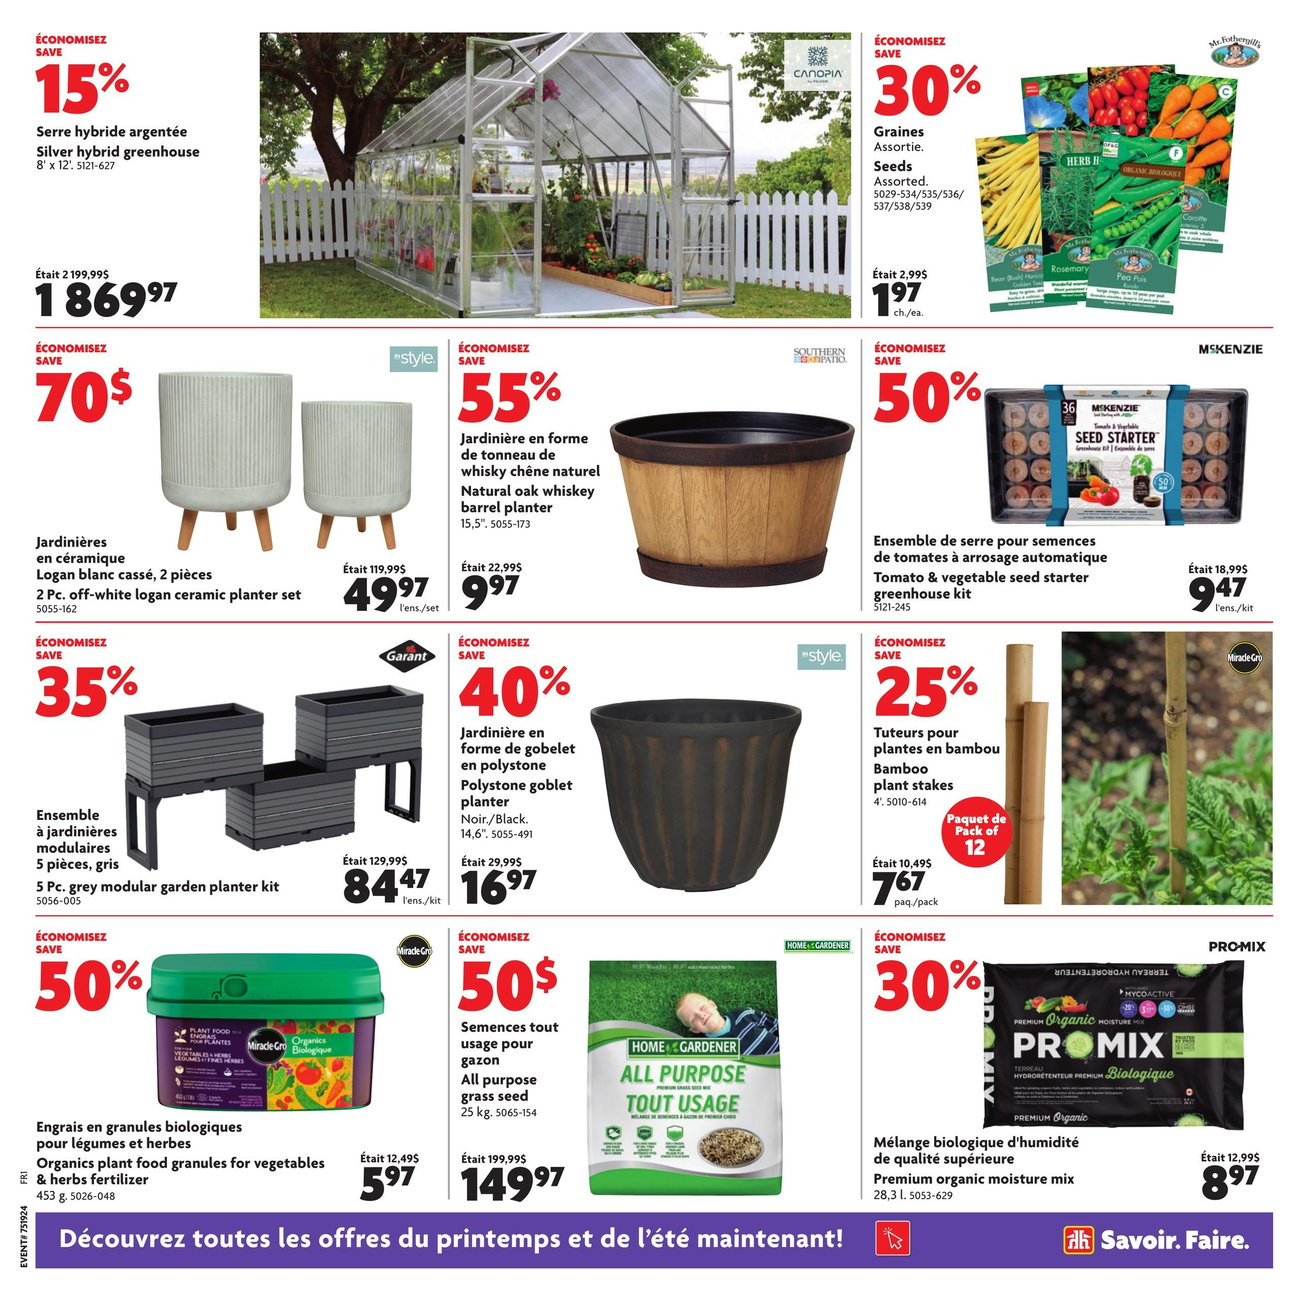 Home Hardware Building Centre - Quebec - 2 Weeks of Savings - Page 18